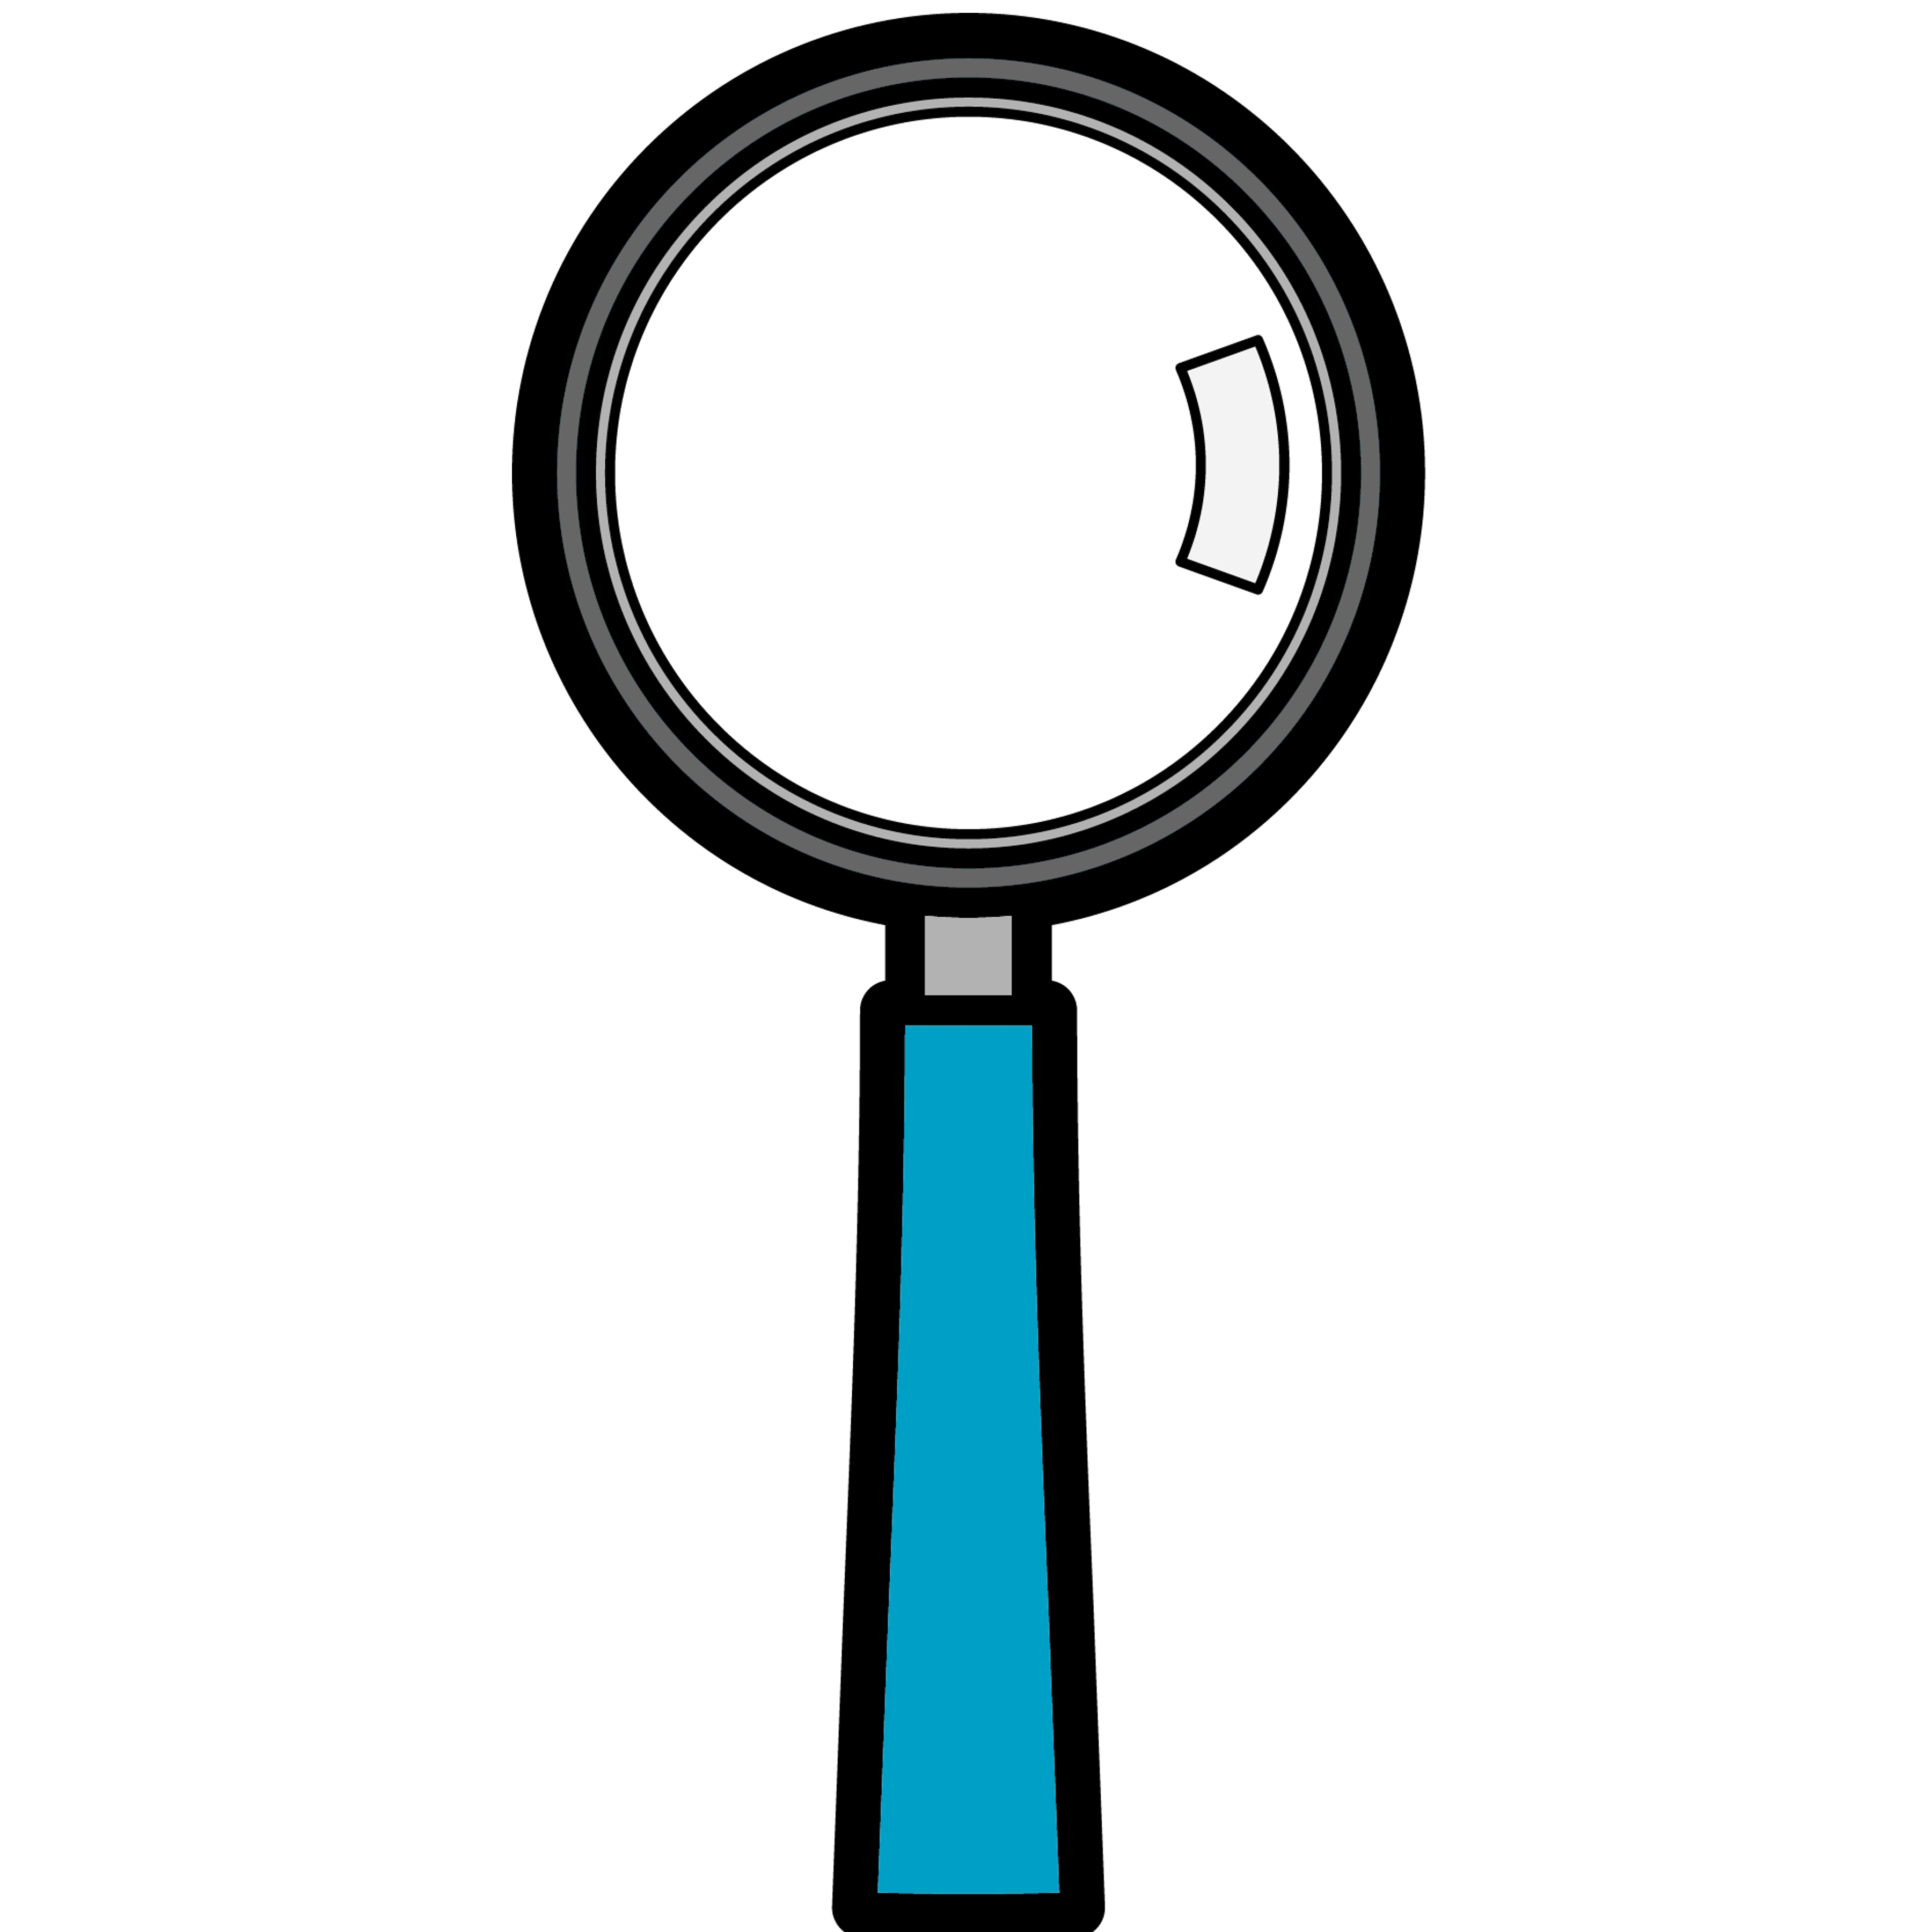 Magnify glass clipart